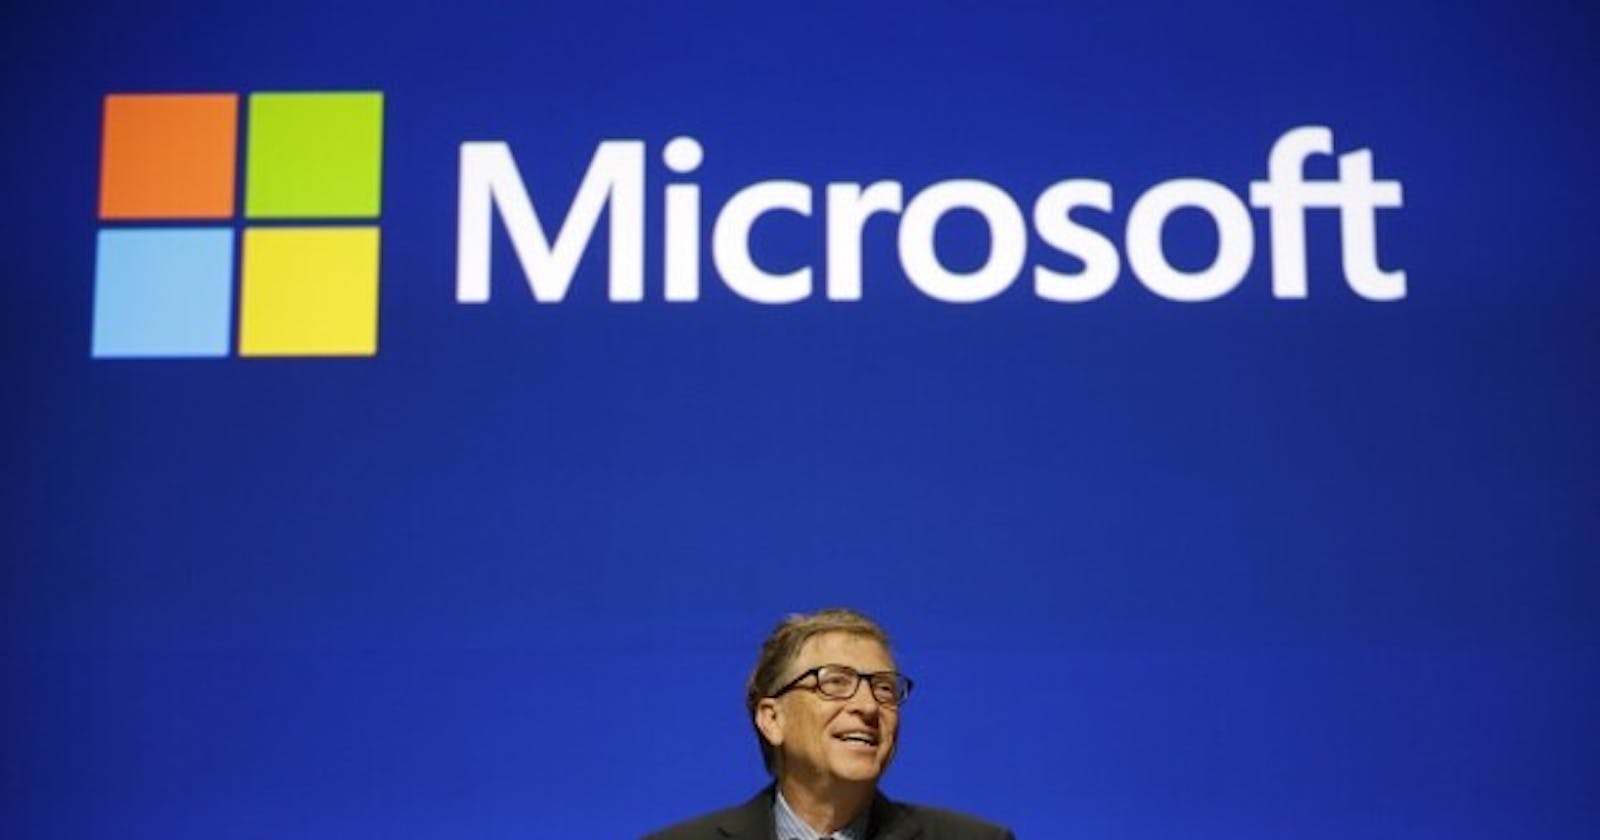 Microsoft's incredible journey from garage to a Trillion-dollar MNC.